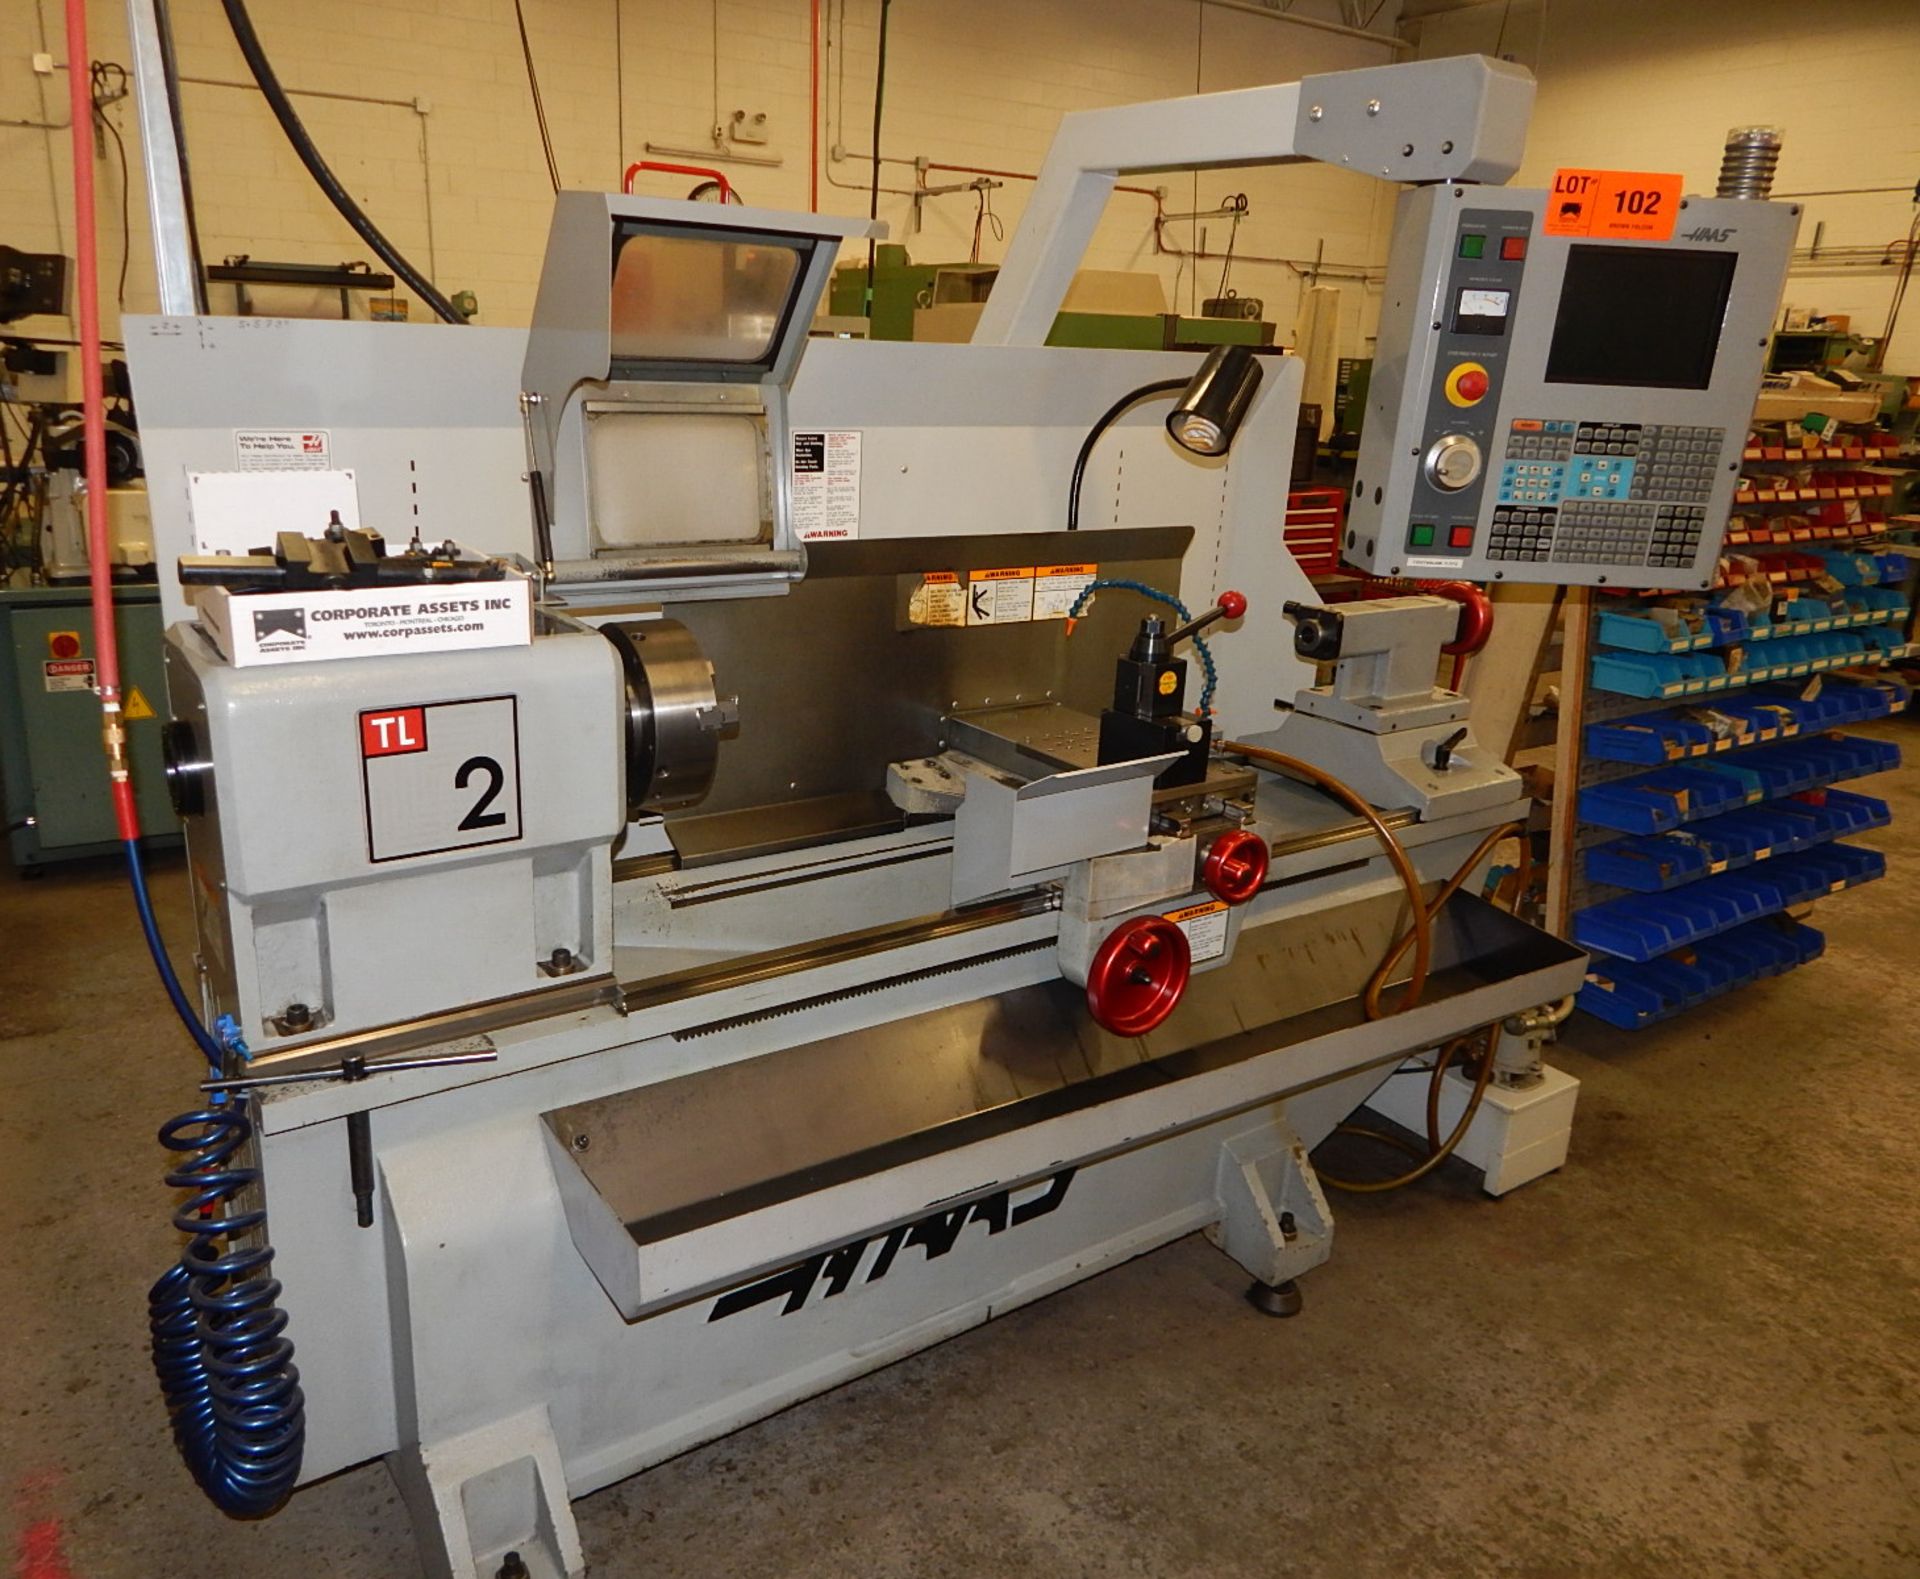 HAAS (02/2005) TR2 CNC LATHE WITH HAAS CNC CONTROL, 28" SWING, 52" BETWEEN CENTERS, 2.75" SPINDLE - Image 3 of 7